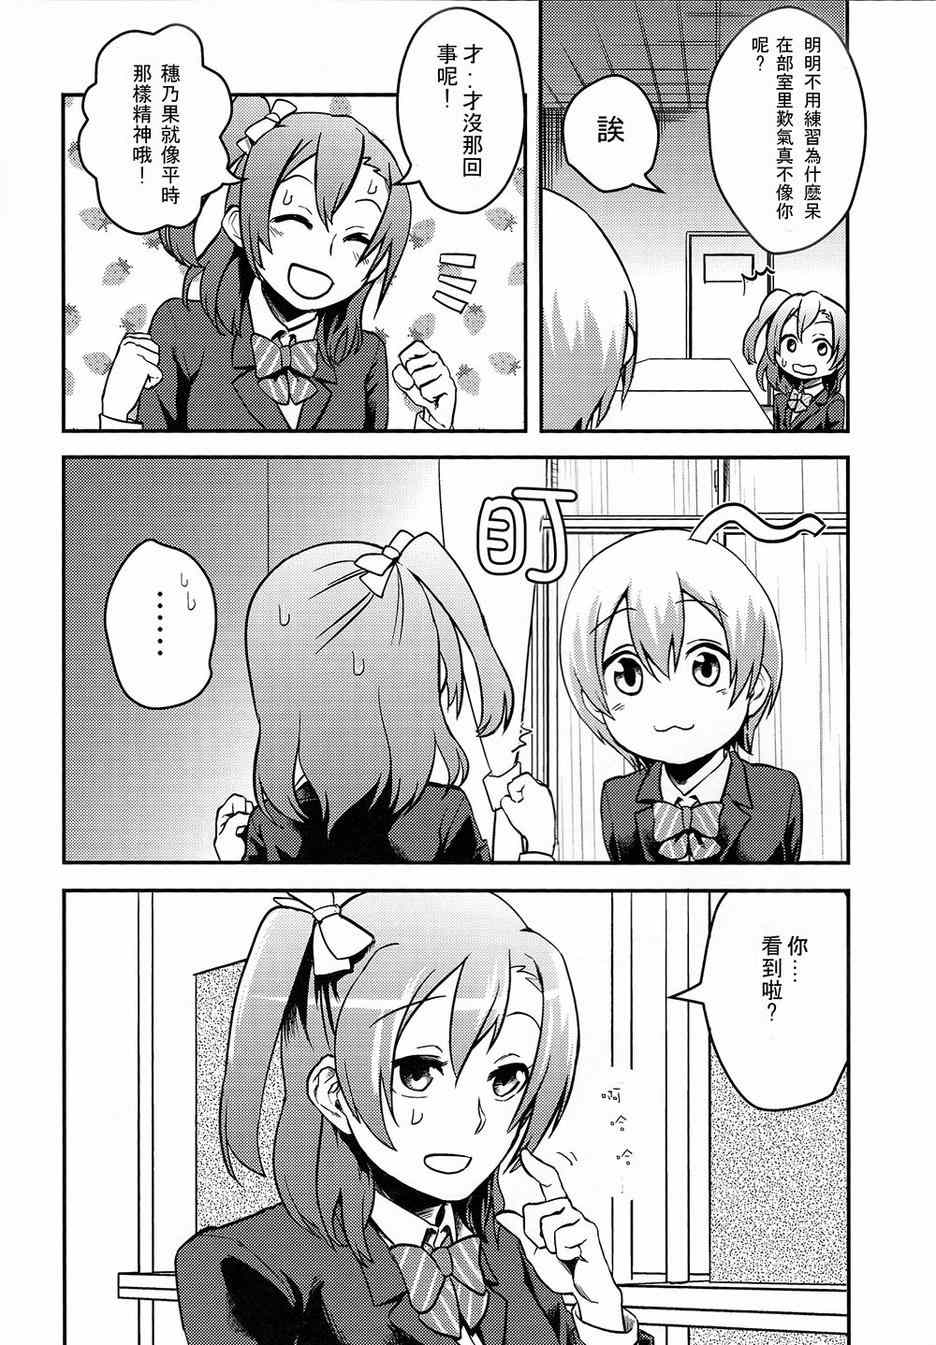 《LoveLive》漫画 LEADERS